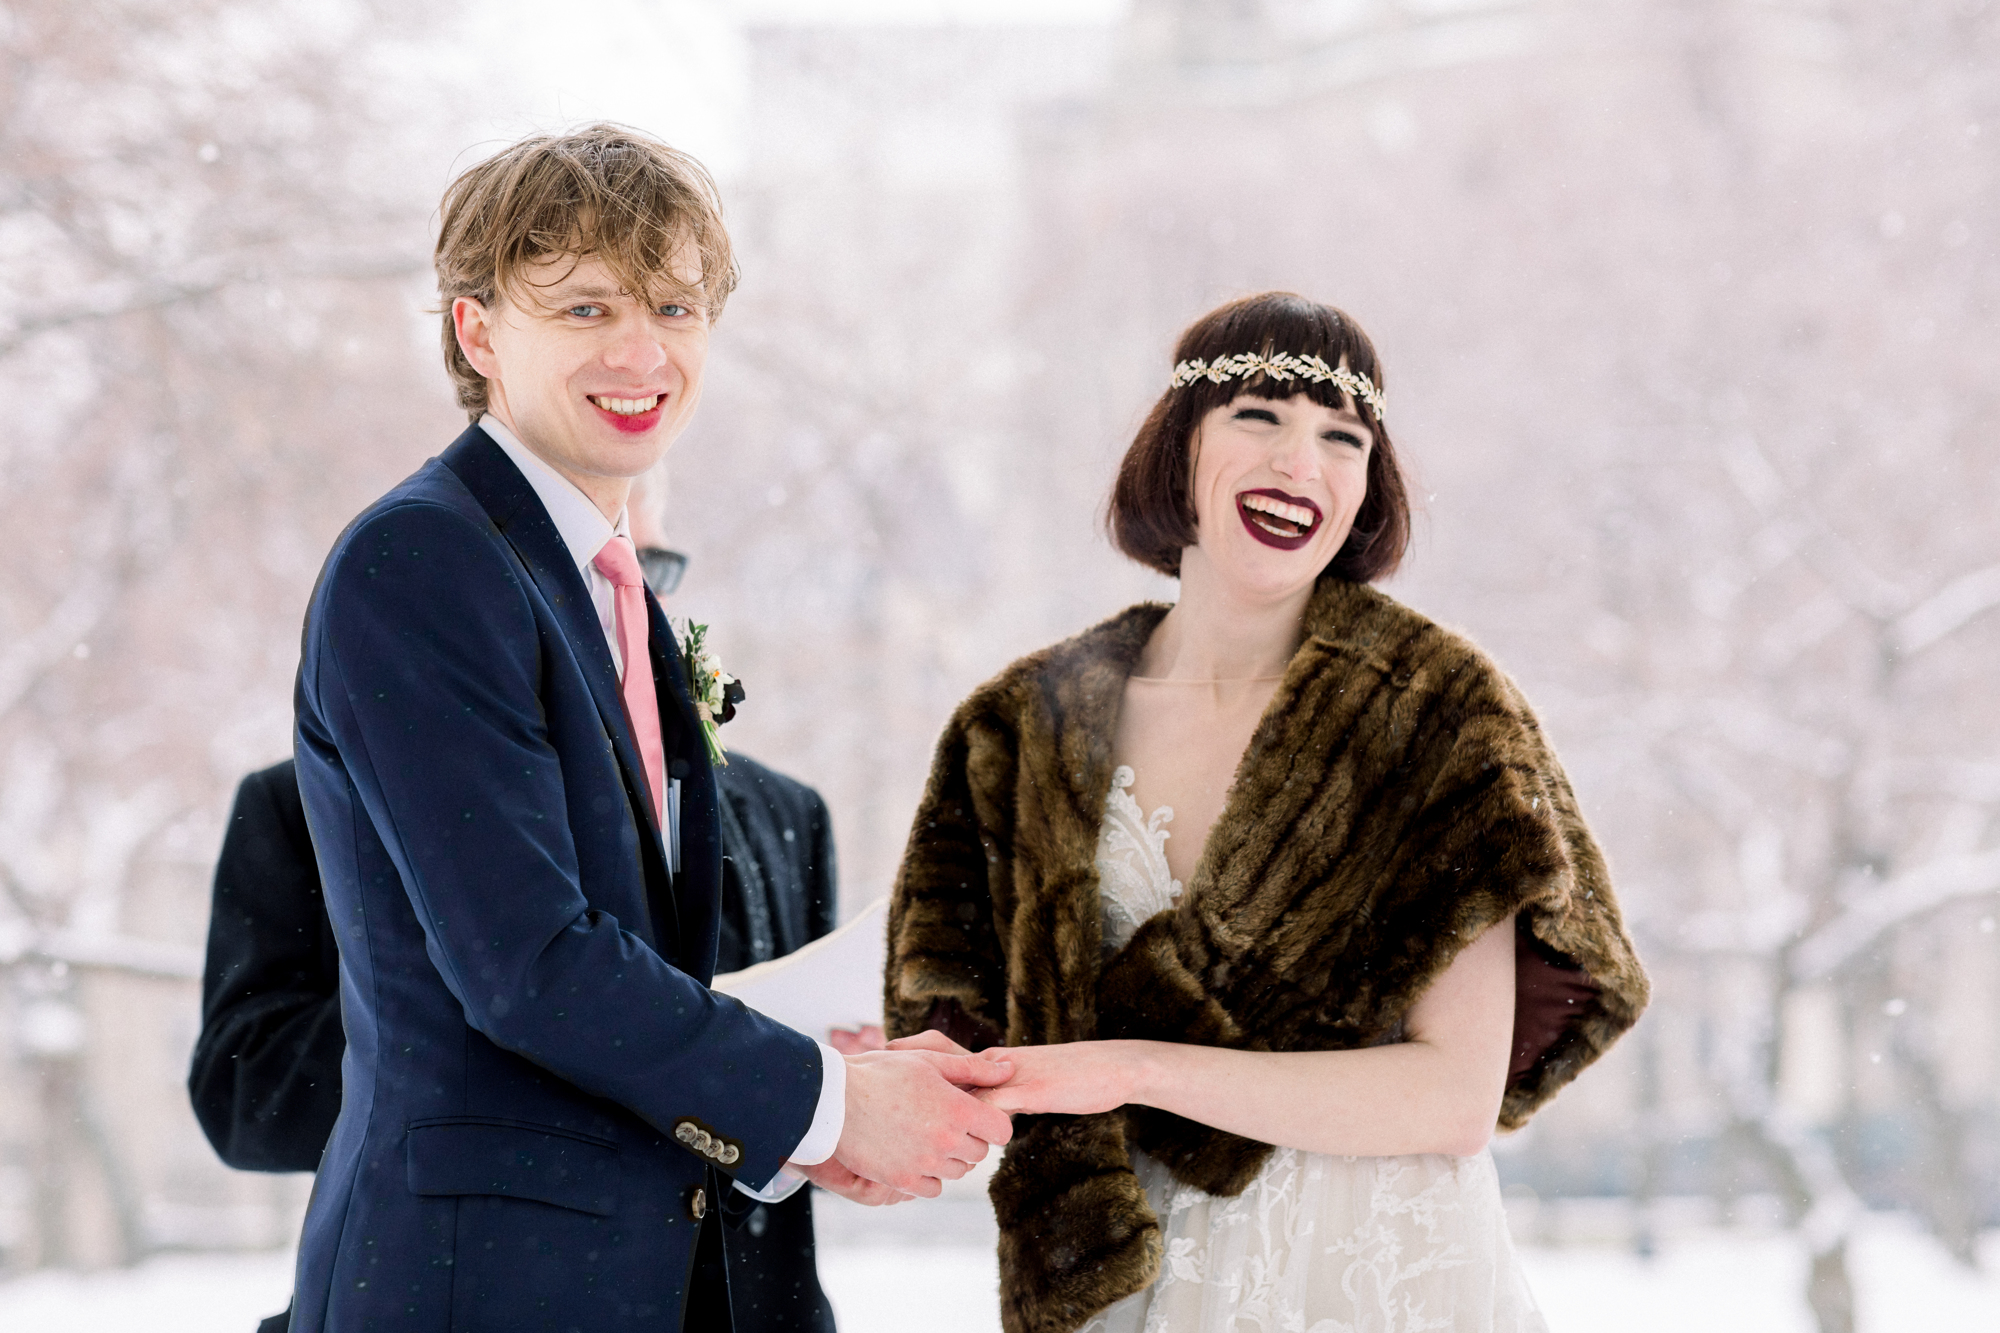 Fun and Candid NYC Winter Wedding in Riverside Park